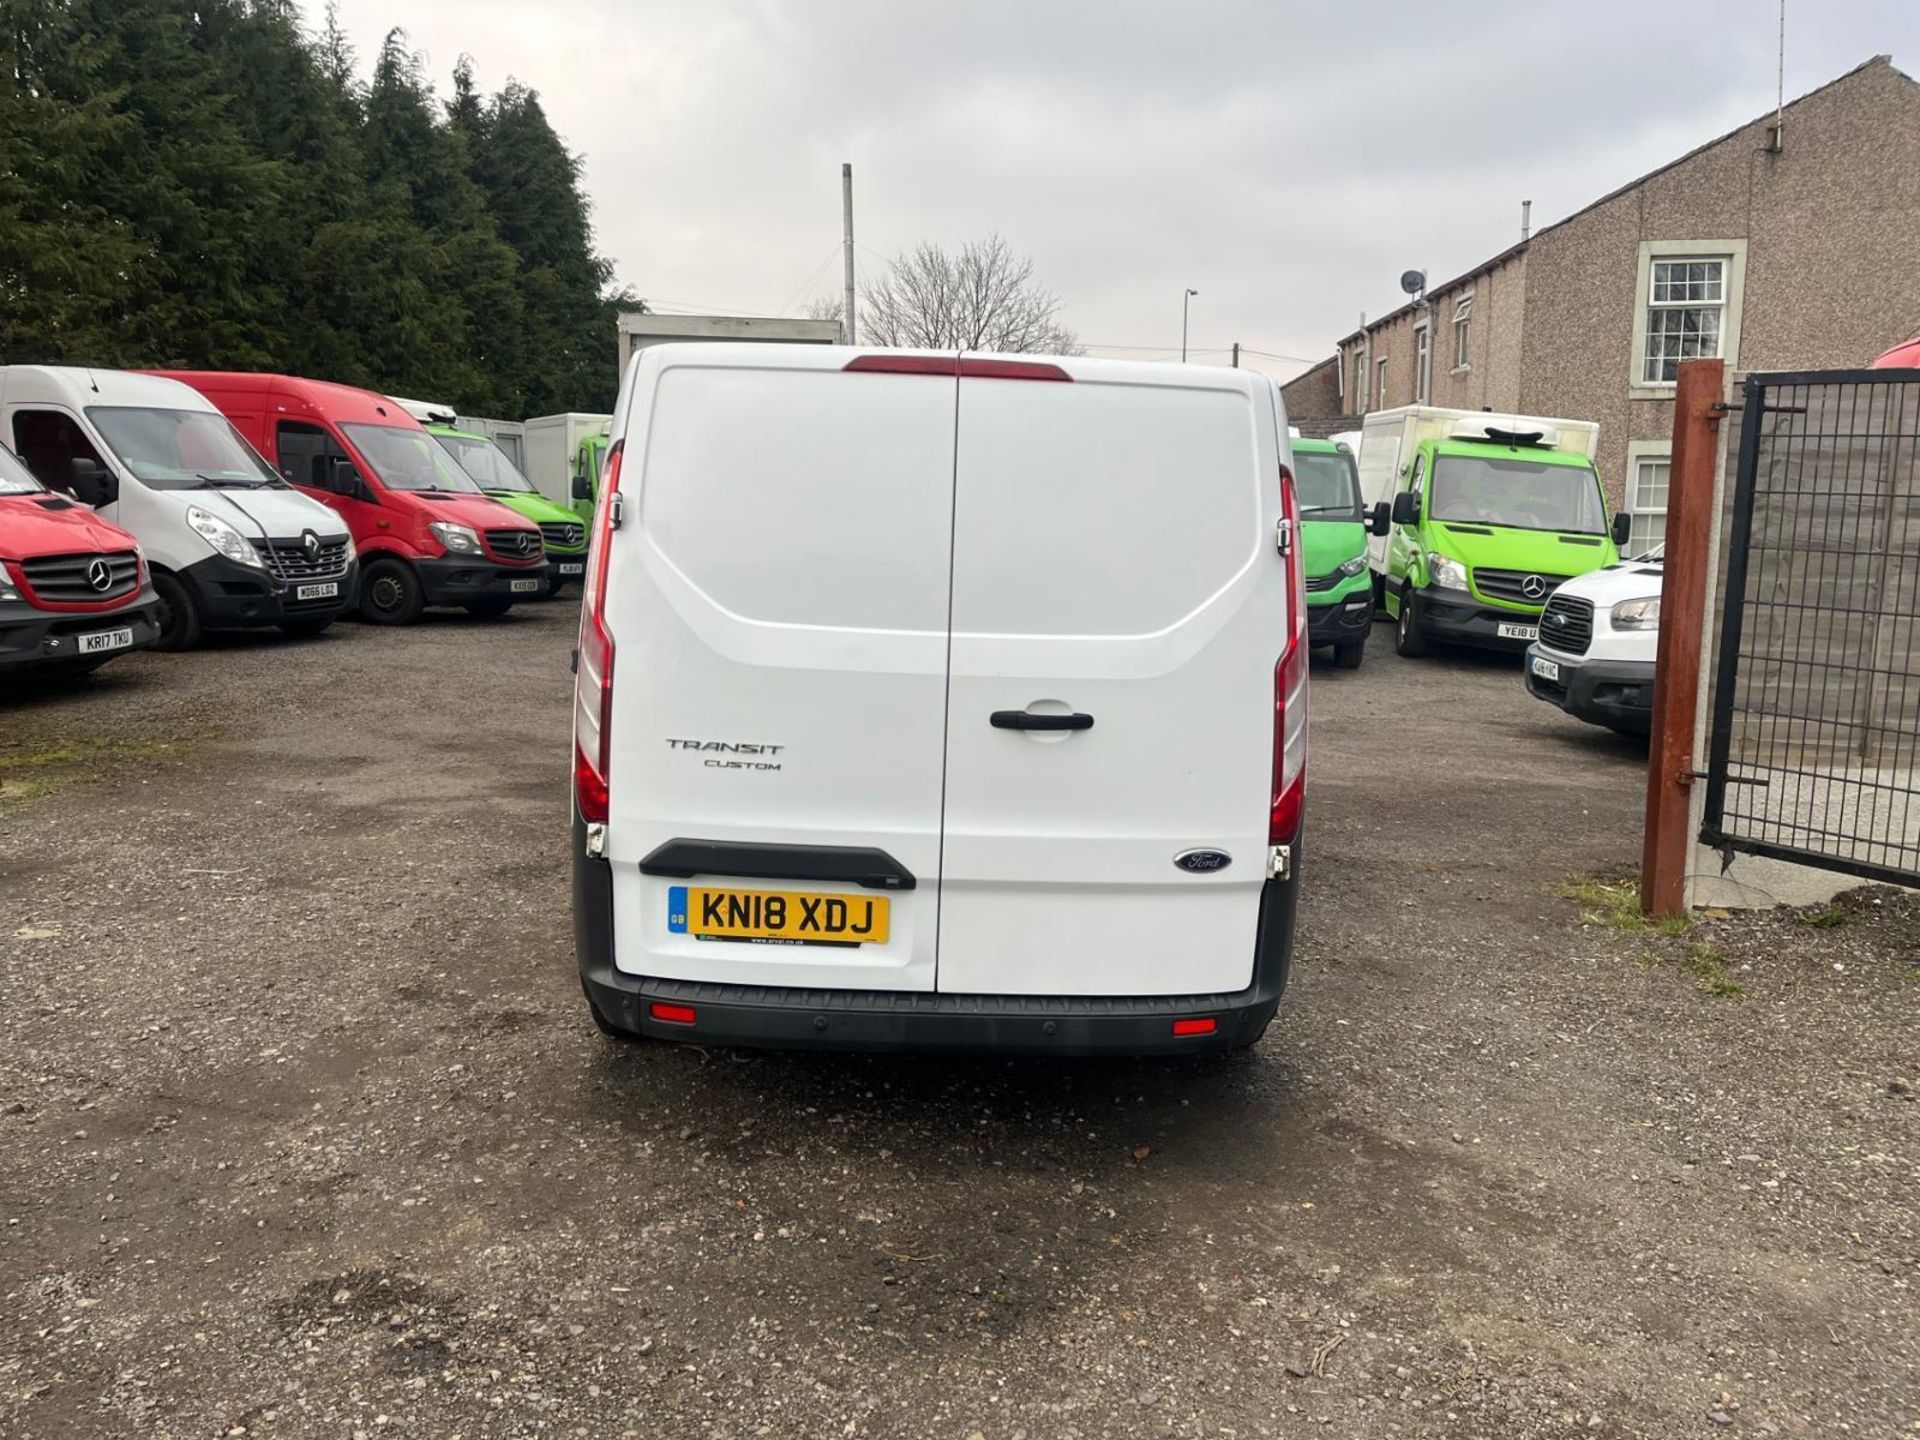 2018 FORD TRANSIT CUSTOM TDCI 130 L1 H1 SWB PANEL VAN ->>>SPECIAL CLEARANCE<<< - Image 5 of 15